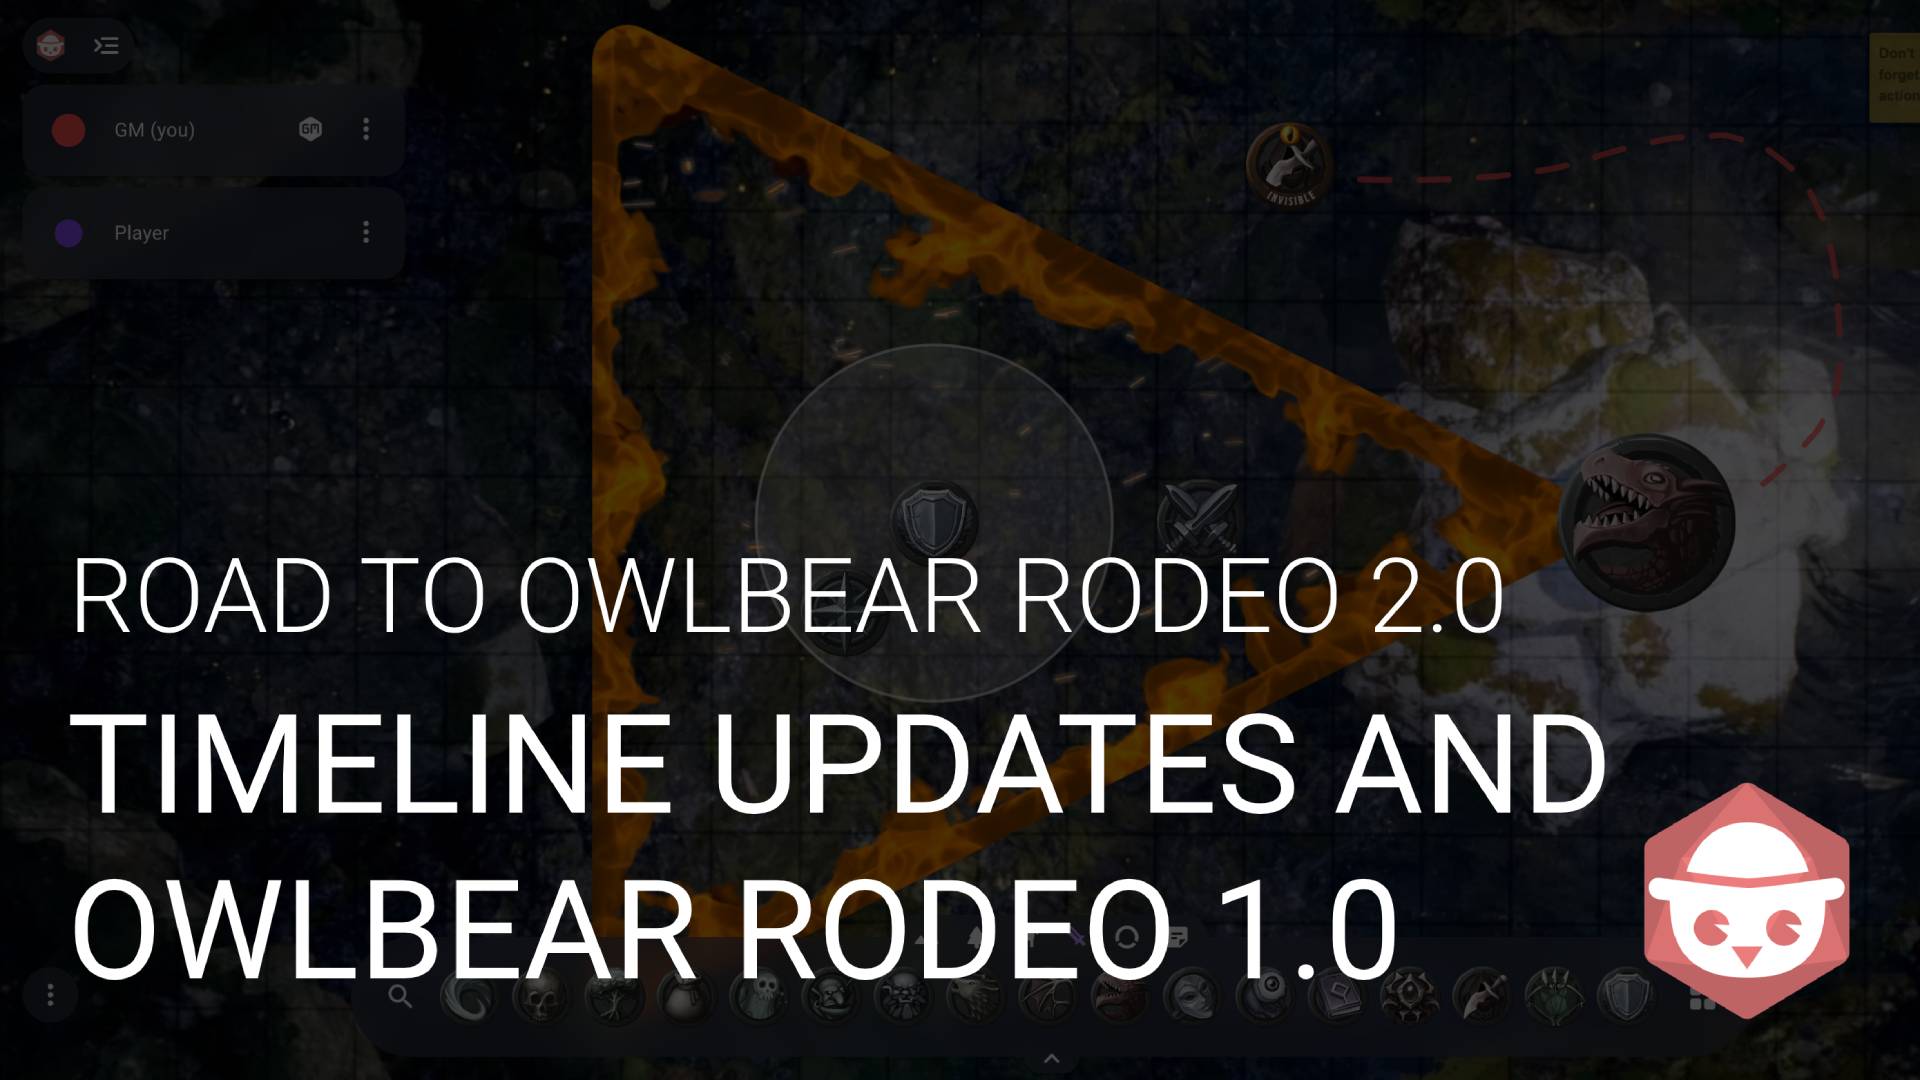 Road to Owlbear Rodeo 2.0 - Timeline updates and Owlbear Rodeo 1.0